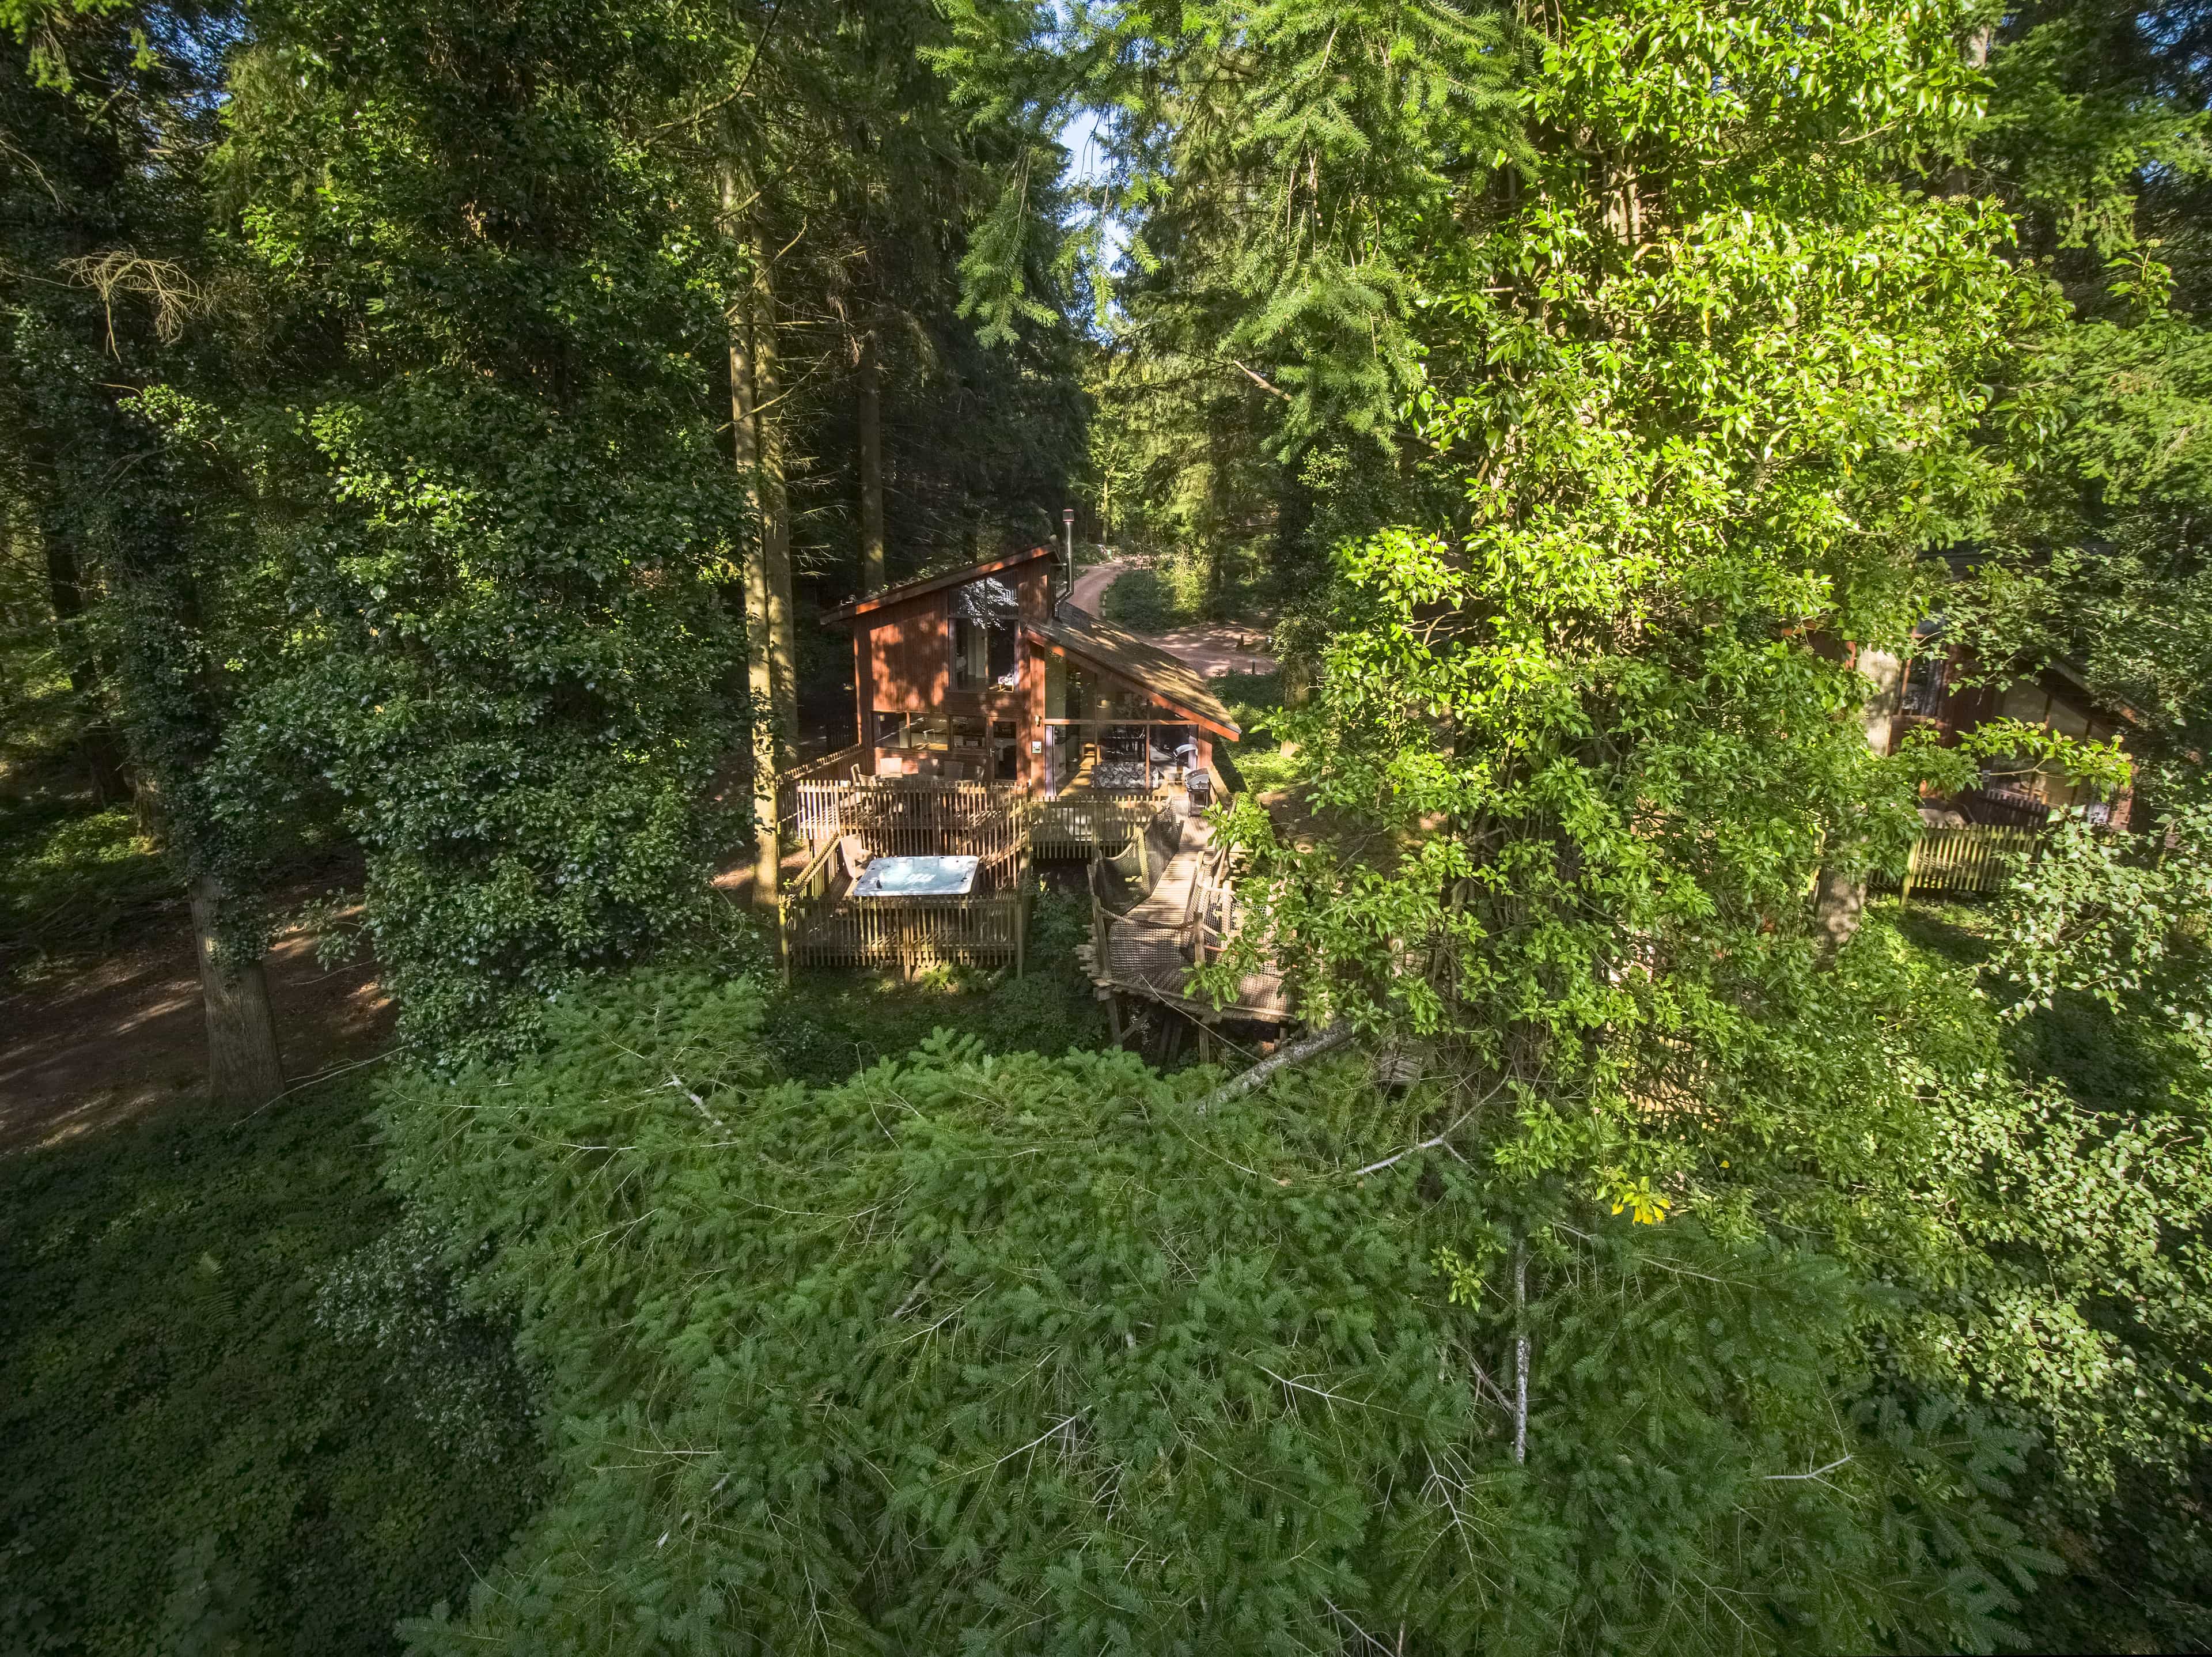 Golden Oak Treehouse at Forest of Dean, Gloucestershire